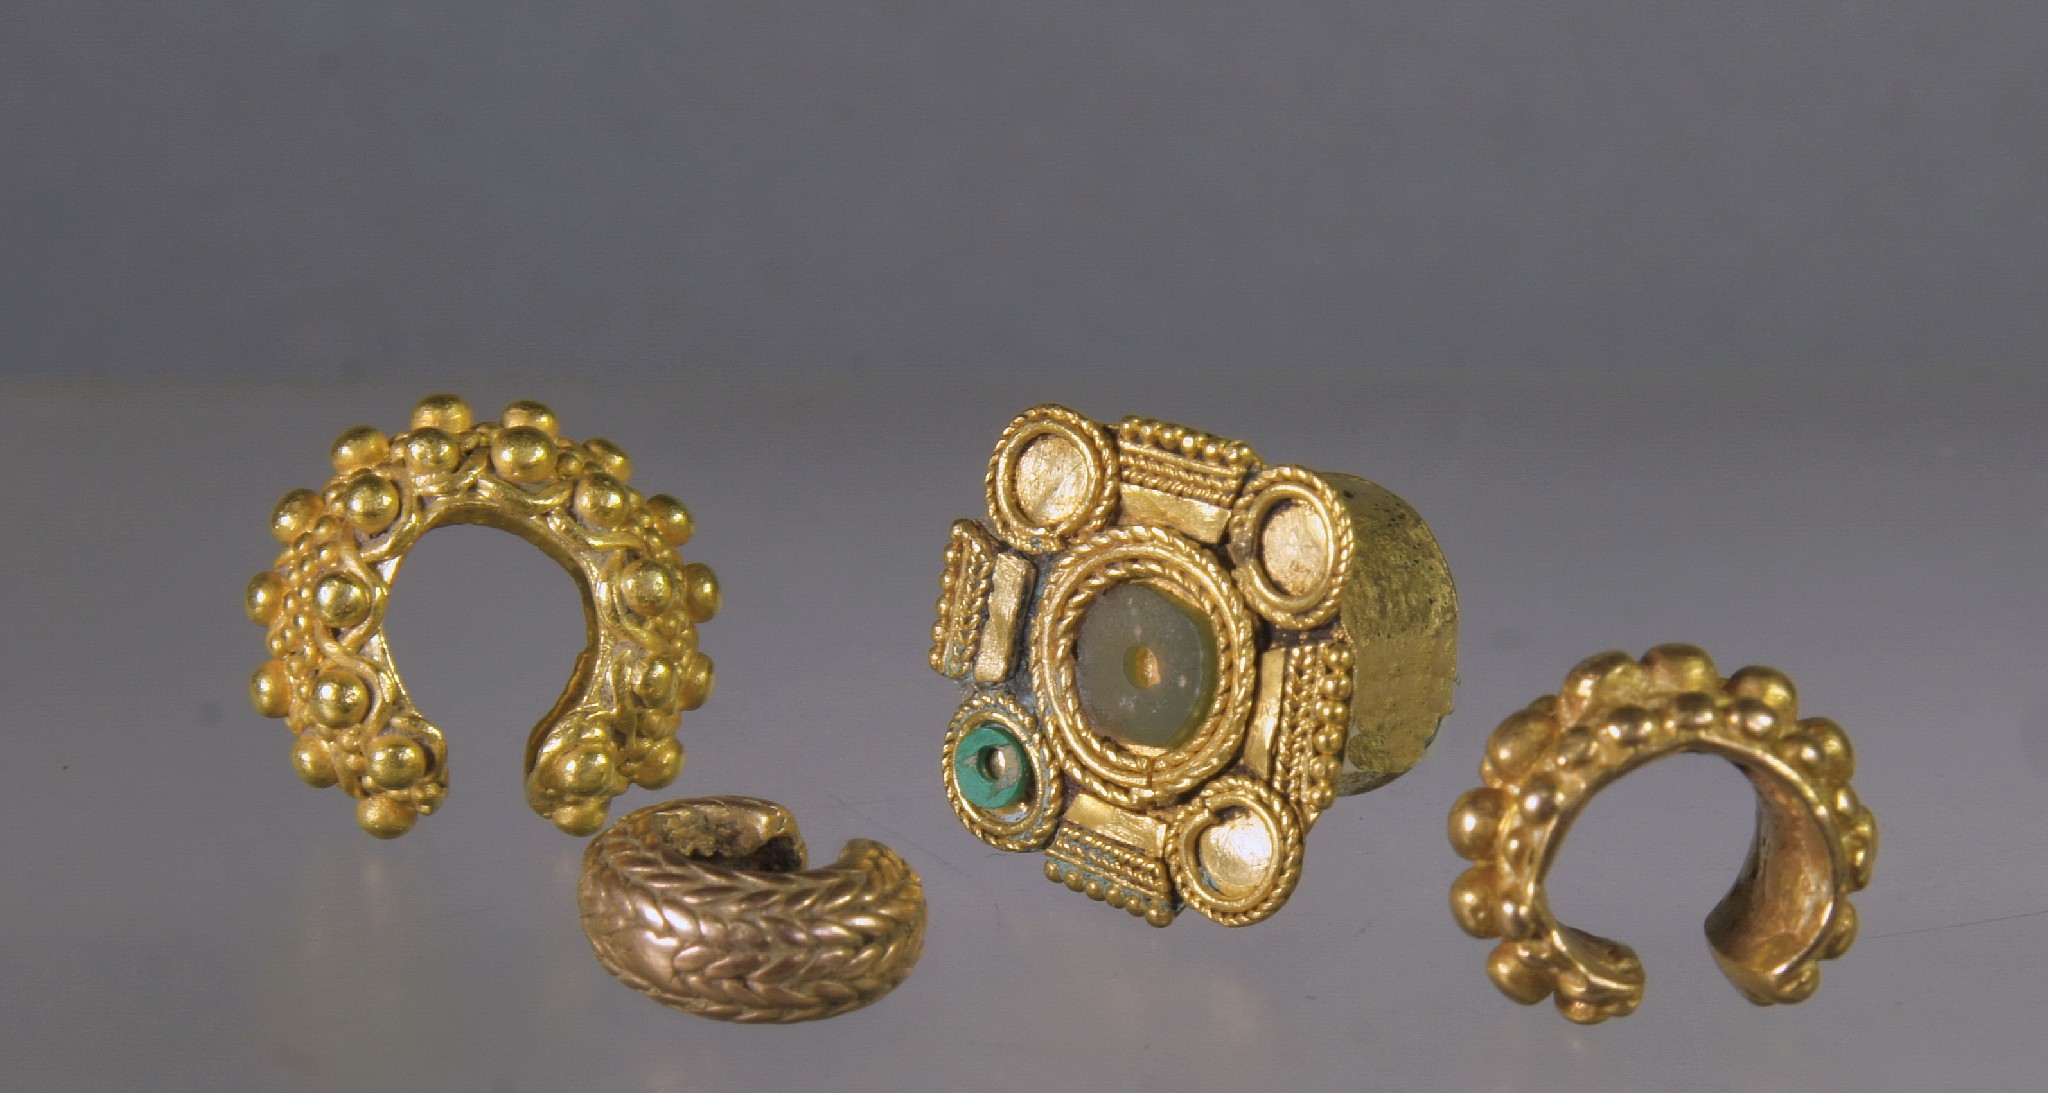 Ecuador, Tolita Gold Ornaments
A set of 4 gold ornaments comprising four hollow ear and nose ornaments, three repousse, the last containing rattles, a solid twisted bracelet of U-shape, the last an ear ornament soldered with a frontal with raised roundels once inlaid.
Media: Metal
Dimensions: Diameters are 7/8 to 2 3/8 inches.
$4,500
99128